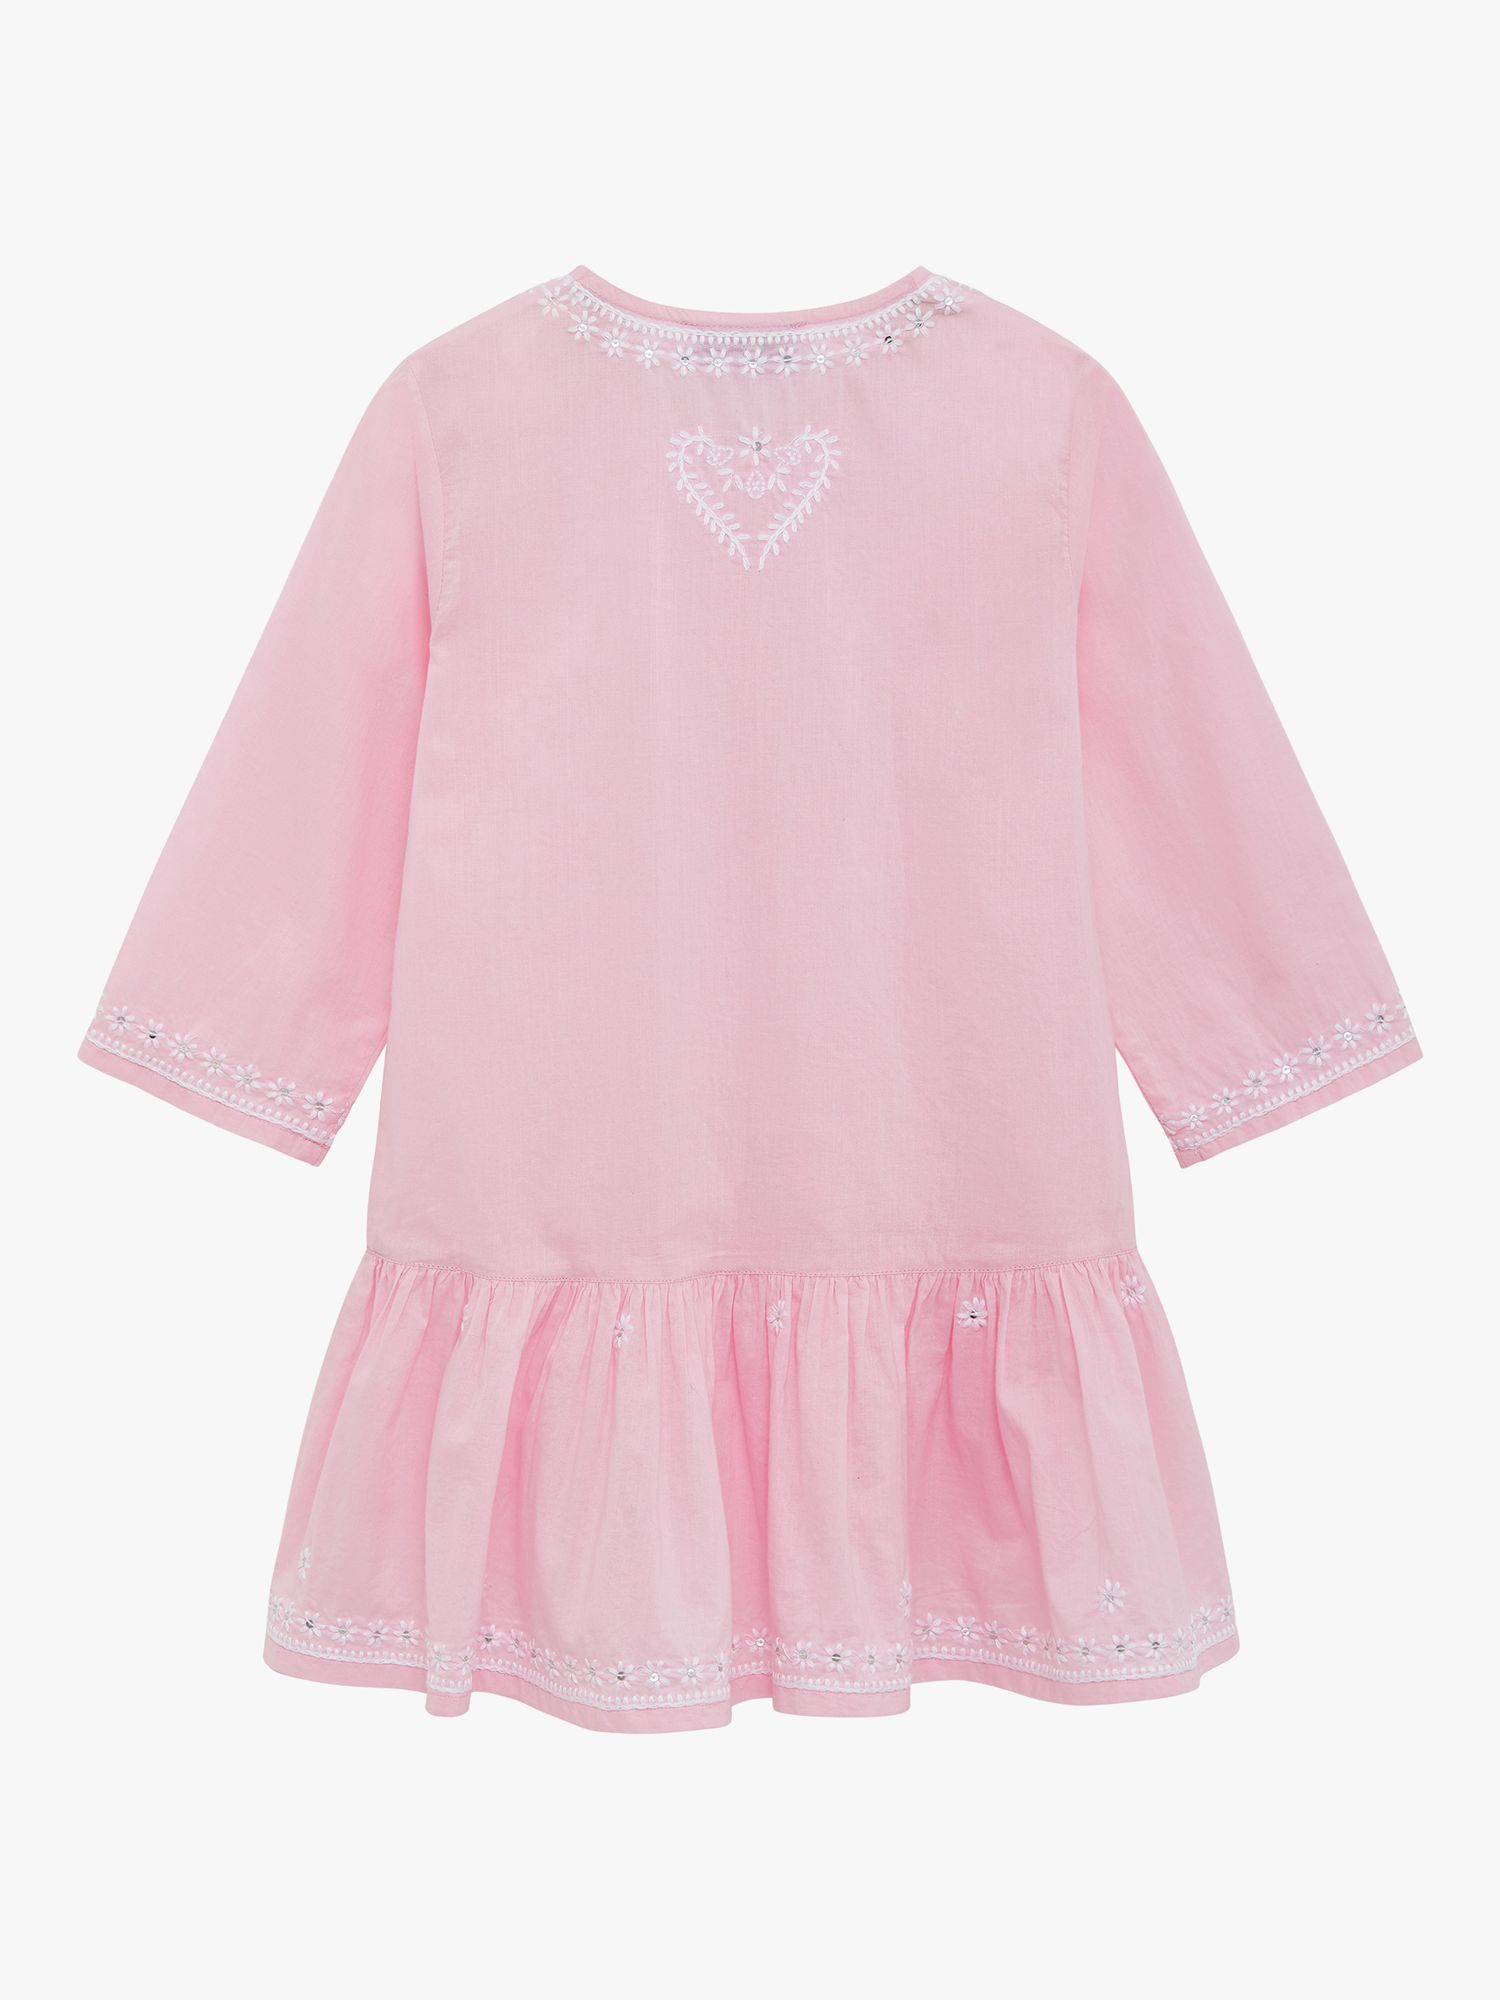 Trotters Lily Rose Kids' Embroidered Cotton Kaftan, Pale Pink/White, 2-3 years